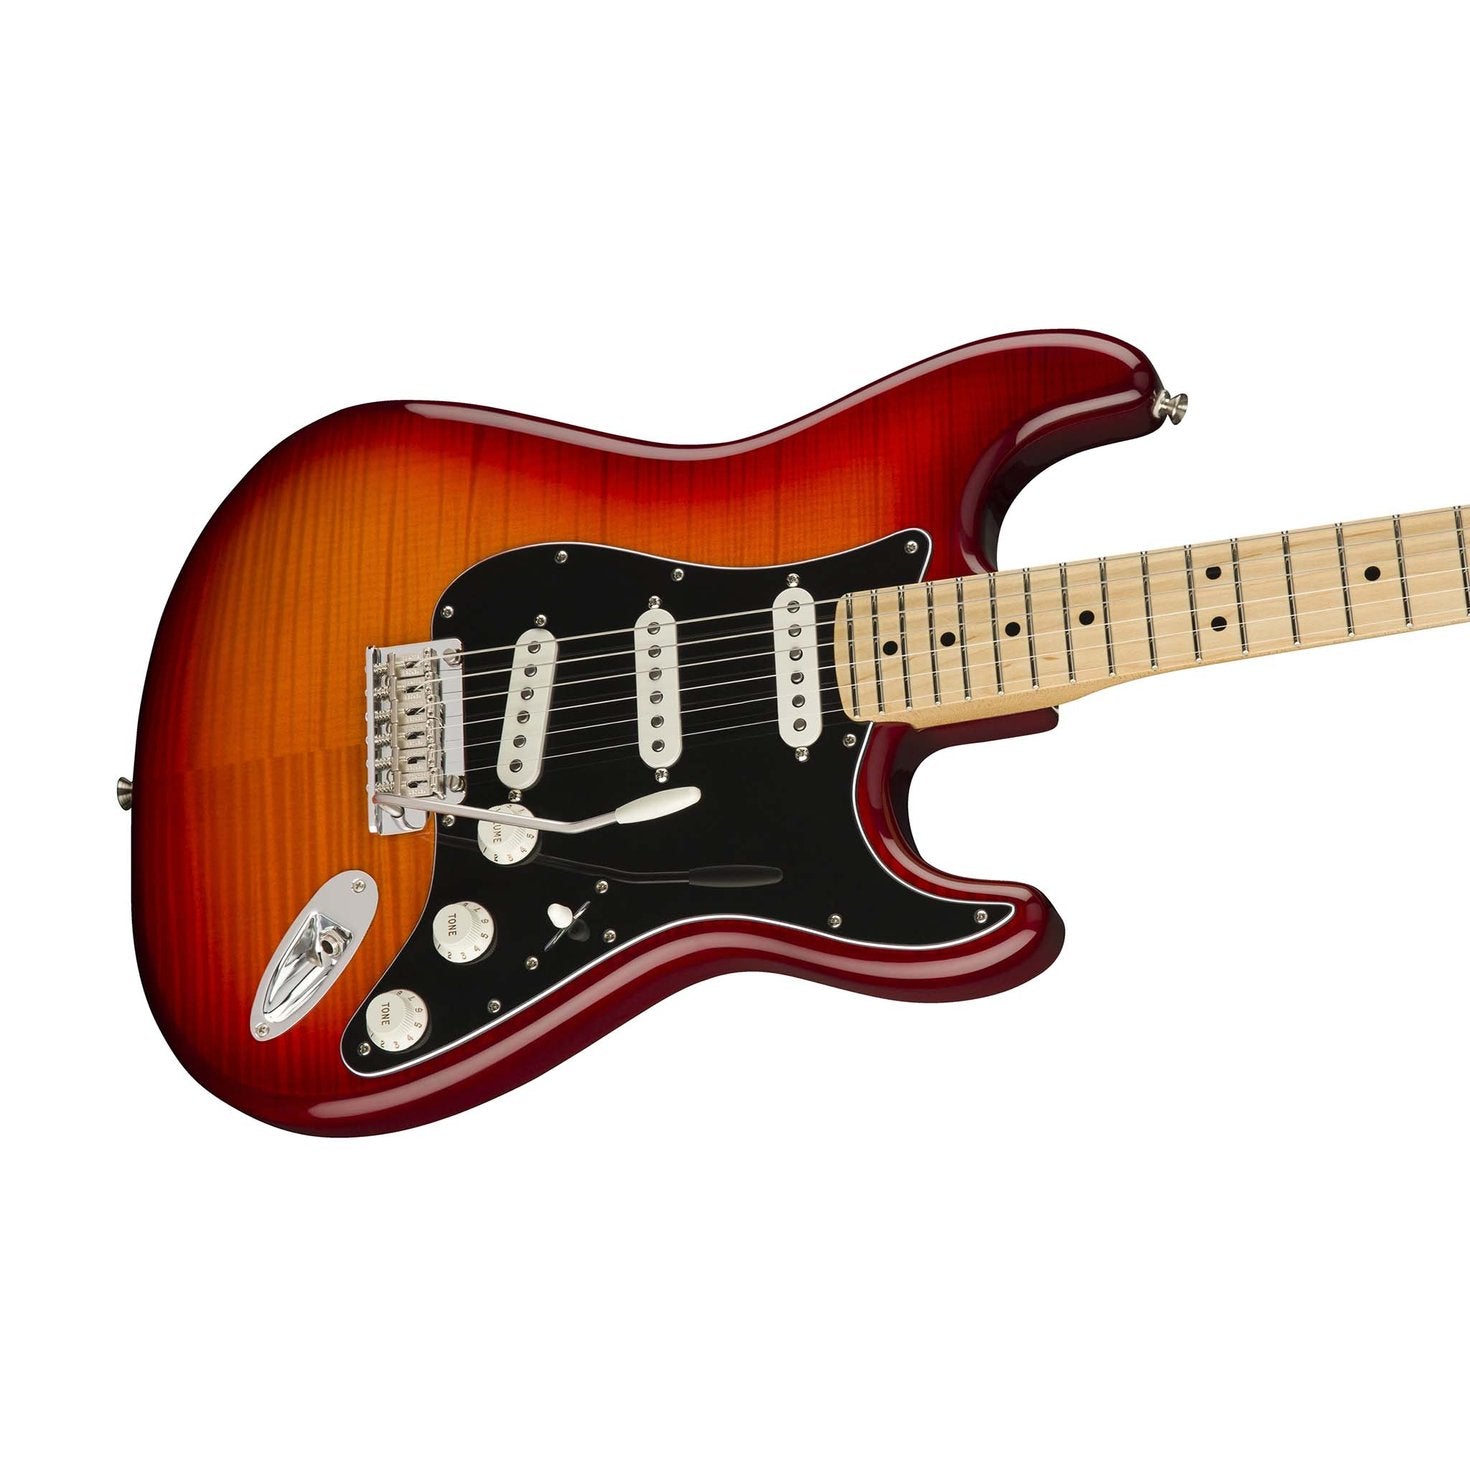 Fender Player Plus Top Stratocaster Electric Guitar, Maple FB, Aged Cherry Burst, FENDER, ELECTRIC GUITAR, fender-eletric-guitar-f03-014-4552-531, ZOSO MUSIC SDN BHD